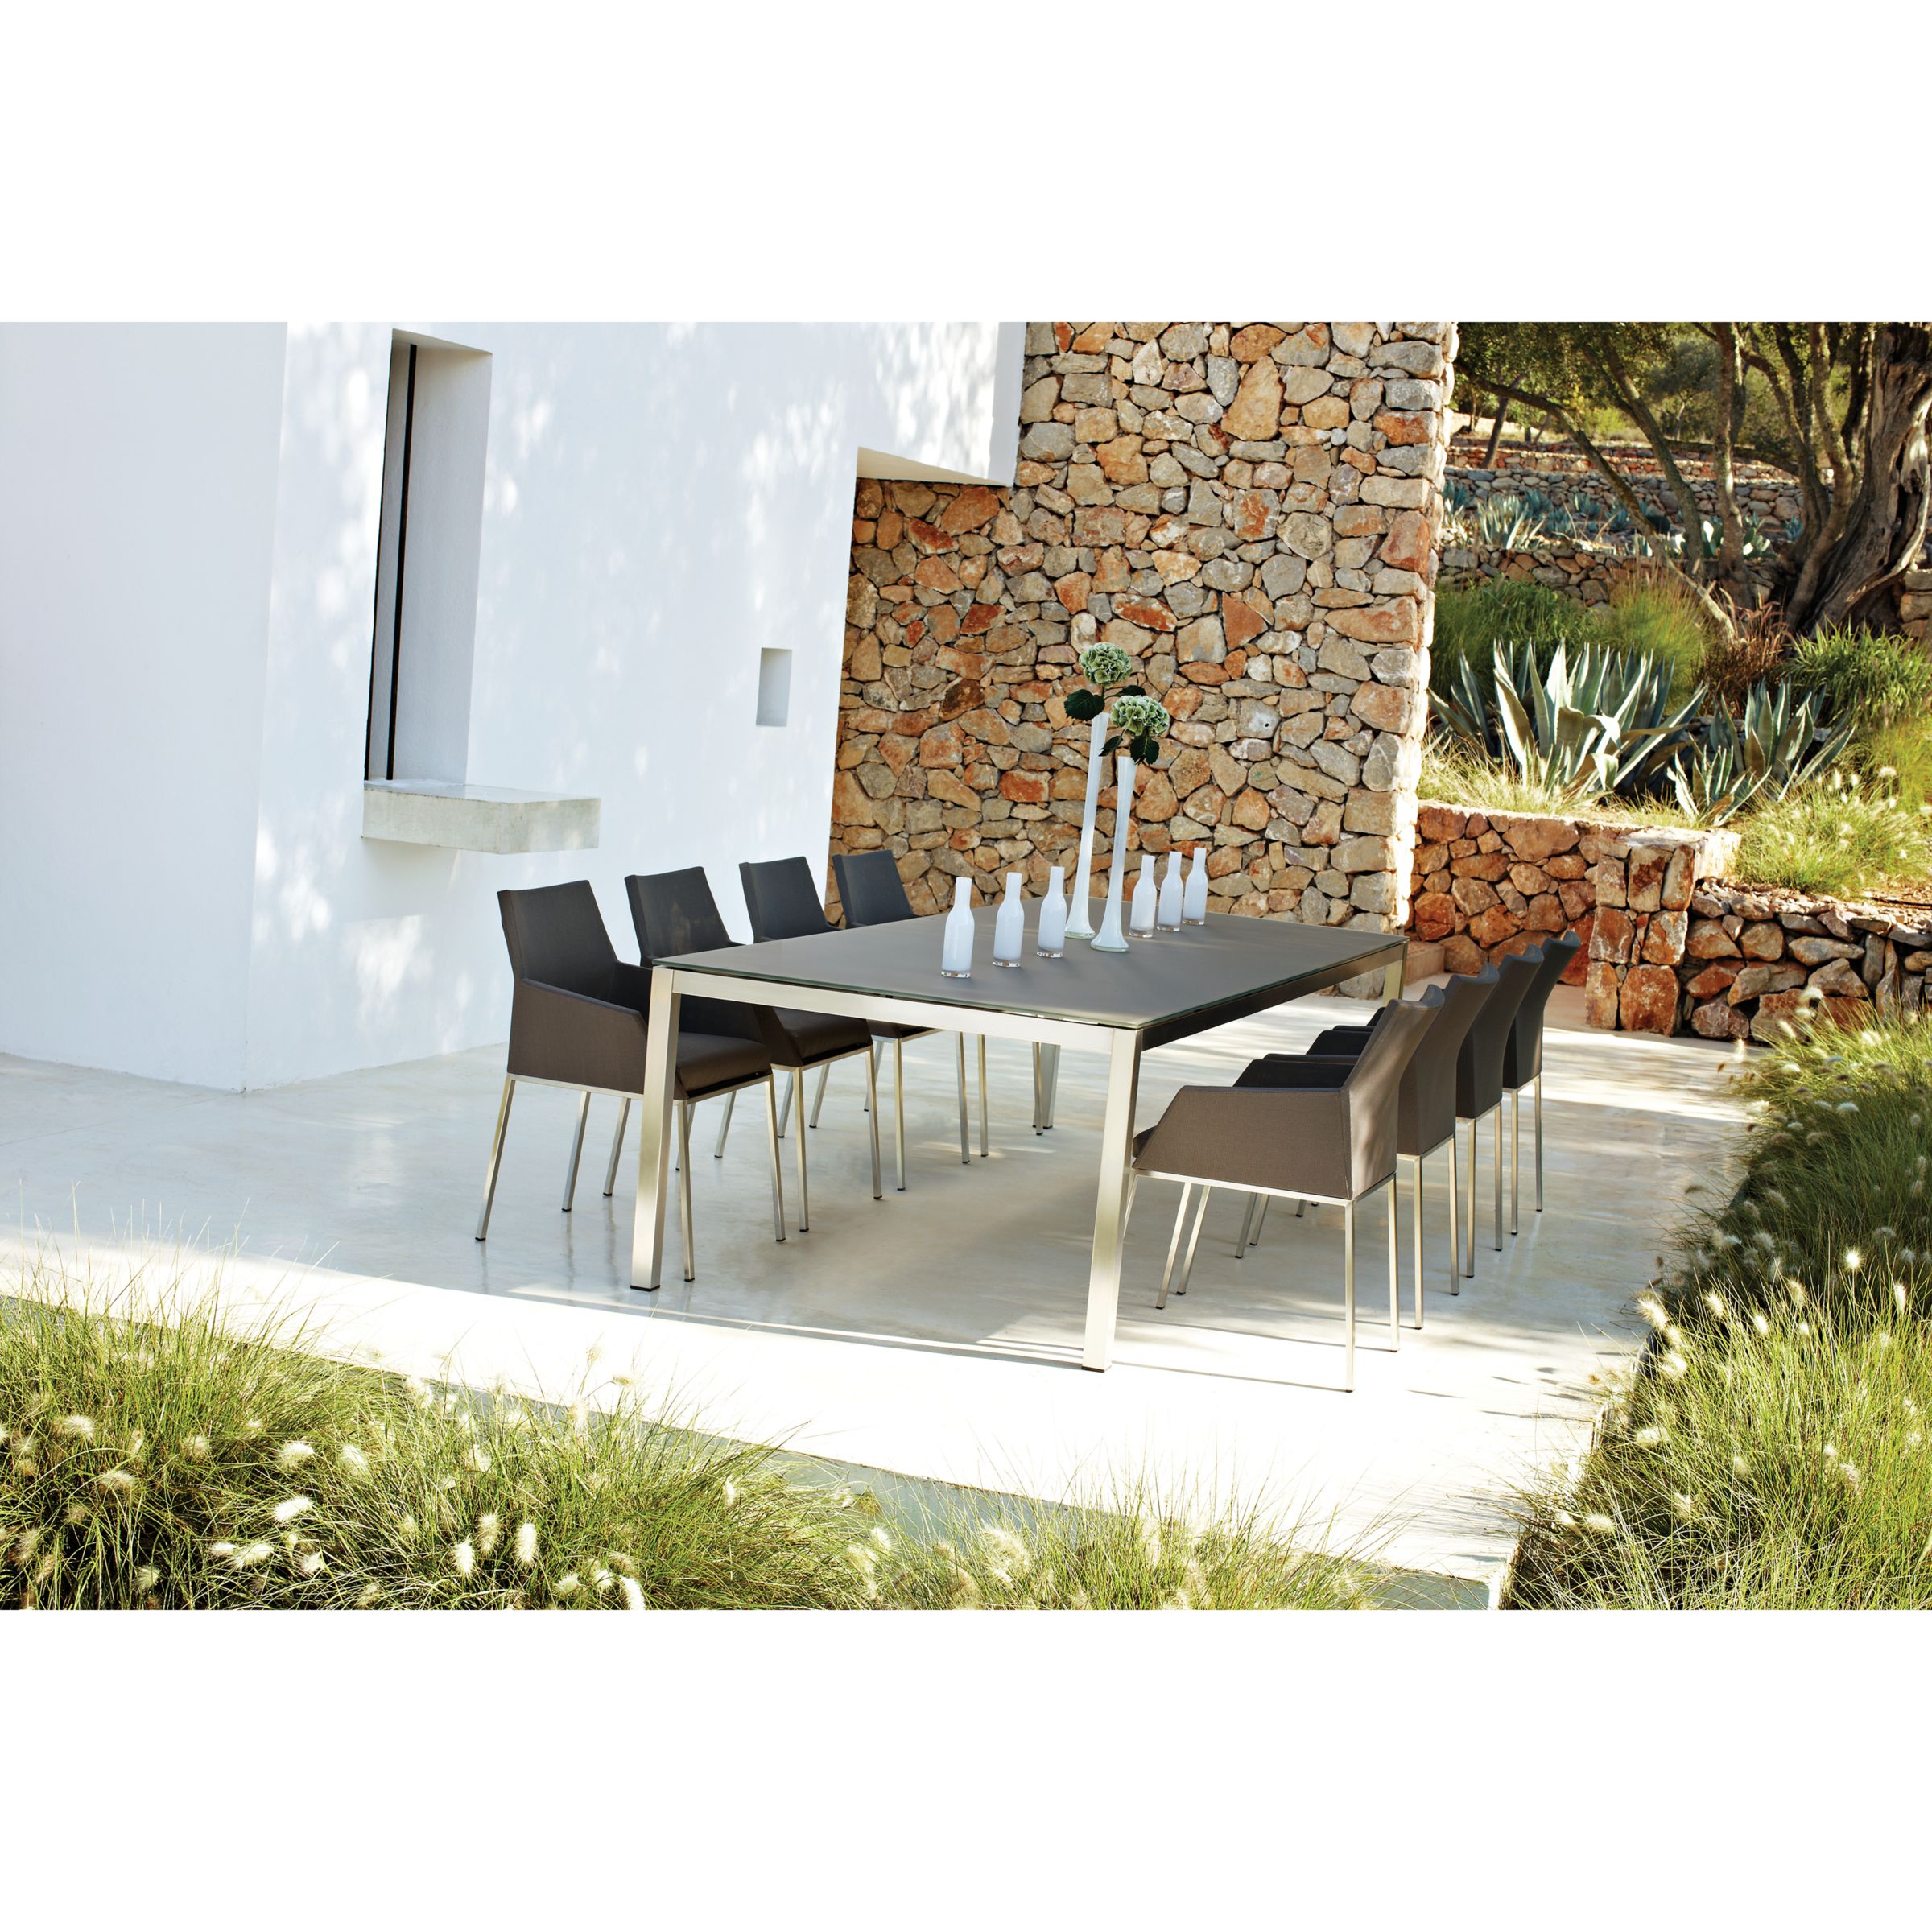 Gloster Kore Outdoor Furniture, White Glass